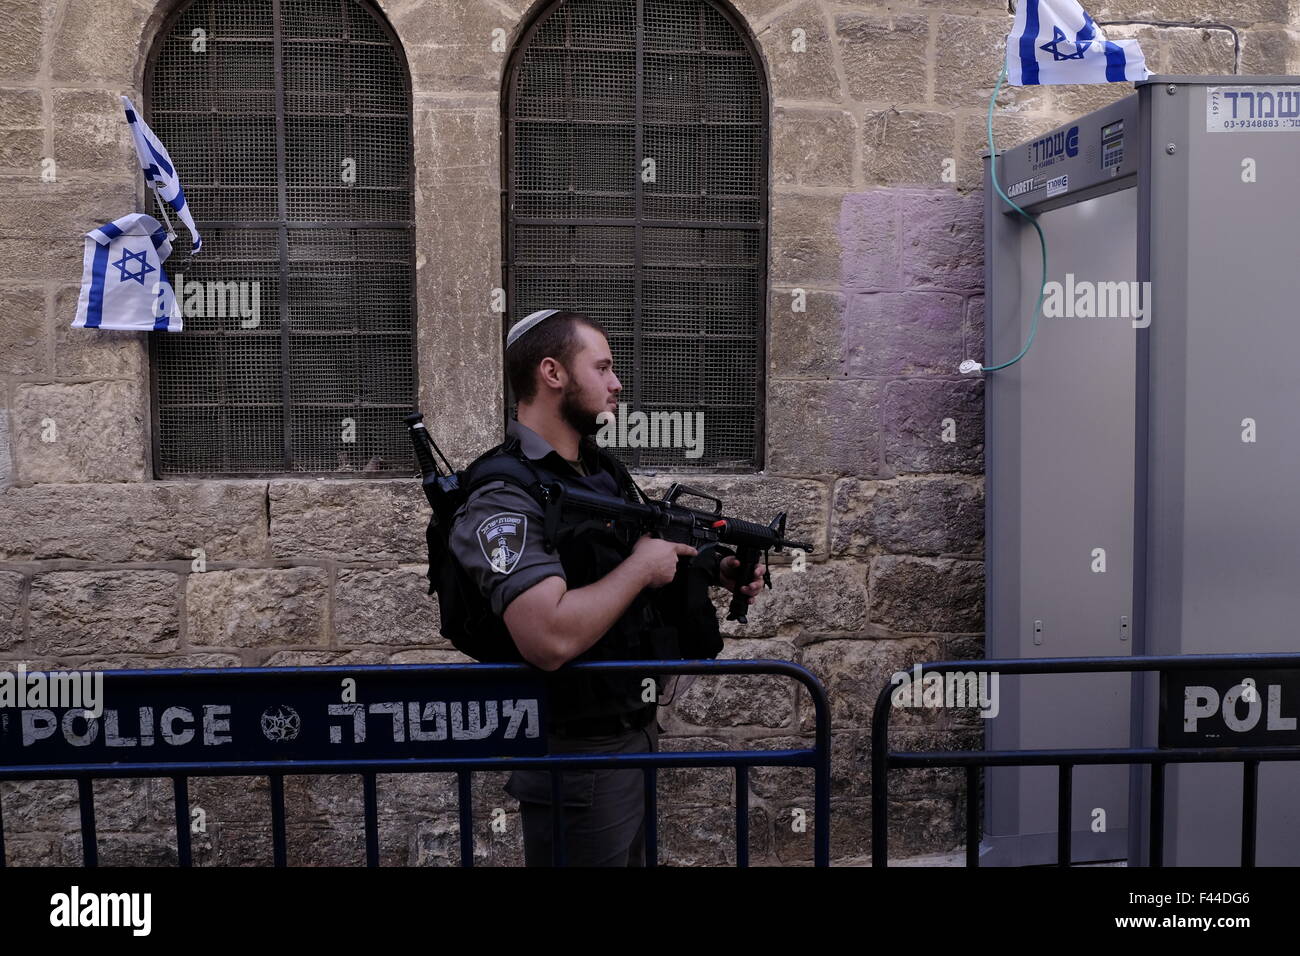 Jerusalem, Israel. 14th October, 2015. An armed Israeli border policeman stands guard next to a metal detector being installed in the Muslim Quarter in Jerusalem's Old City, following a wave of terror attacks. East Jerusalem, Israel on 14 October 2015  Israel has been the scene of several stabbing attacks over the last few weeks, leaving dozens of people injured and resulting in several deaths on both sides. Many fear that the uprisings will lead to a full scale conflict between Israel and Palestine. Credit:  Eddie Gerald/Alamy Live News Stock Photo